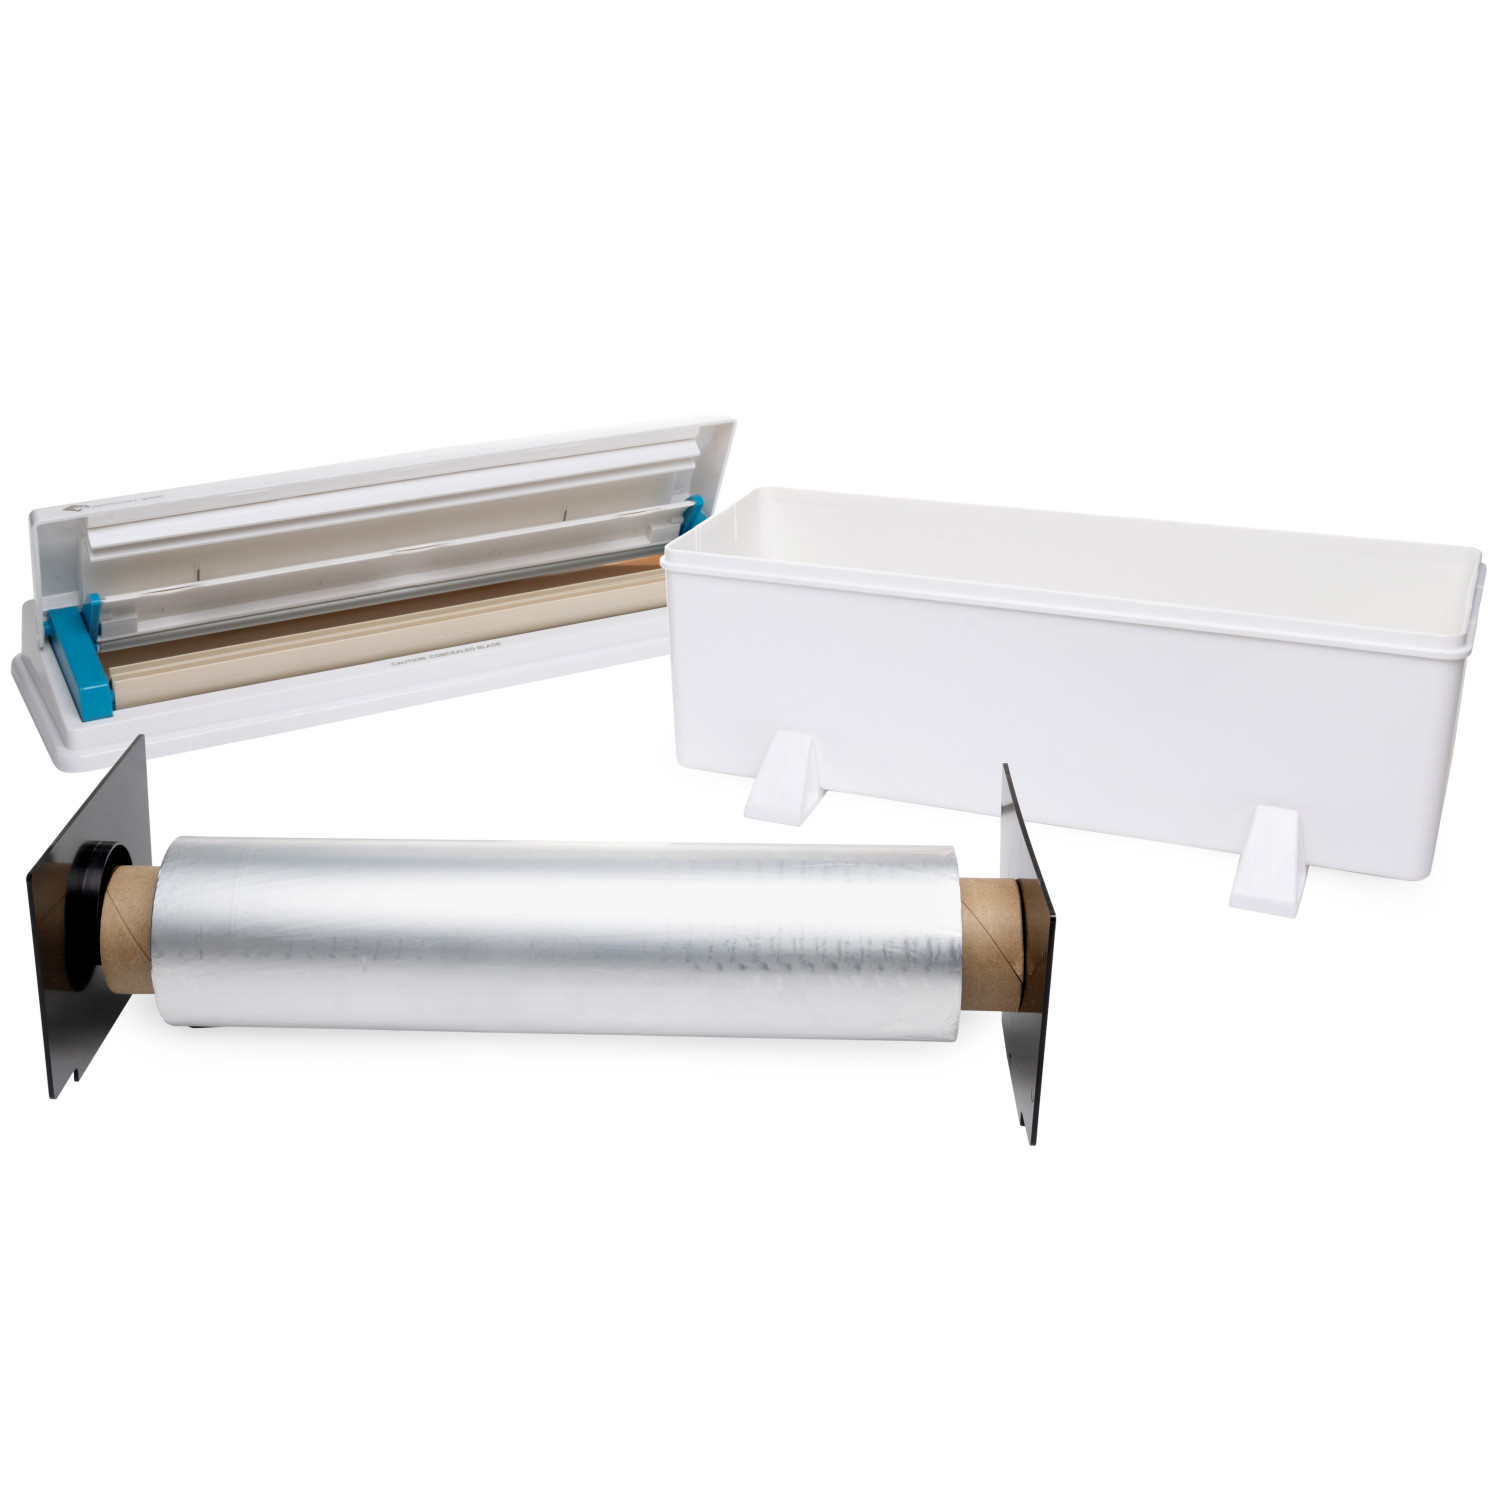 https://idlpack.com/image/cache/catalog/Products/food%20film/small%20foil%20and%20dispenser%20-%206-1500x1500.jpg